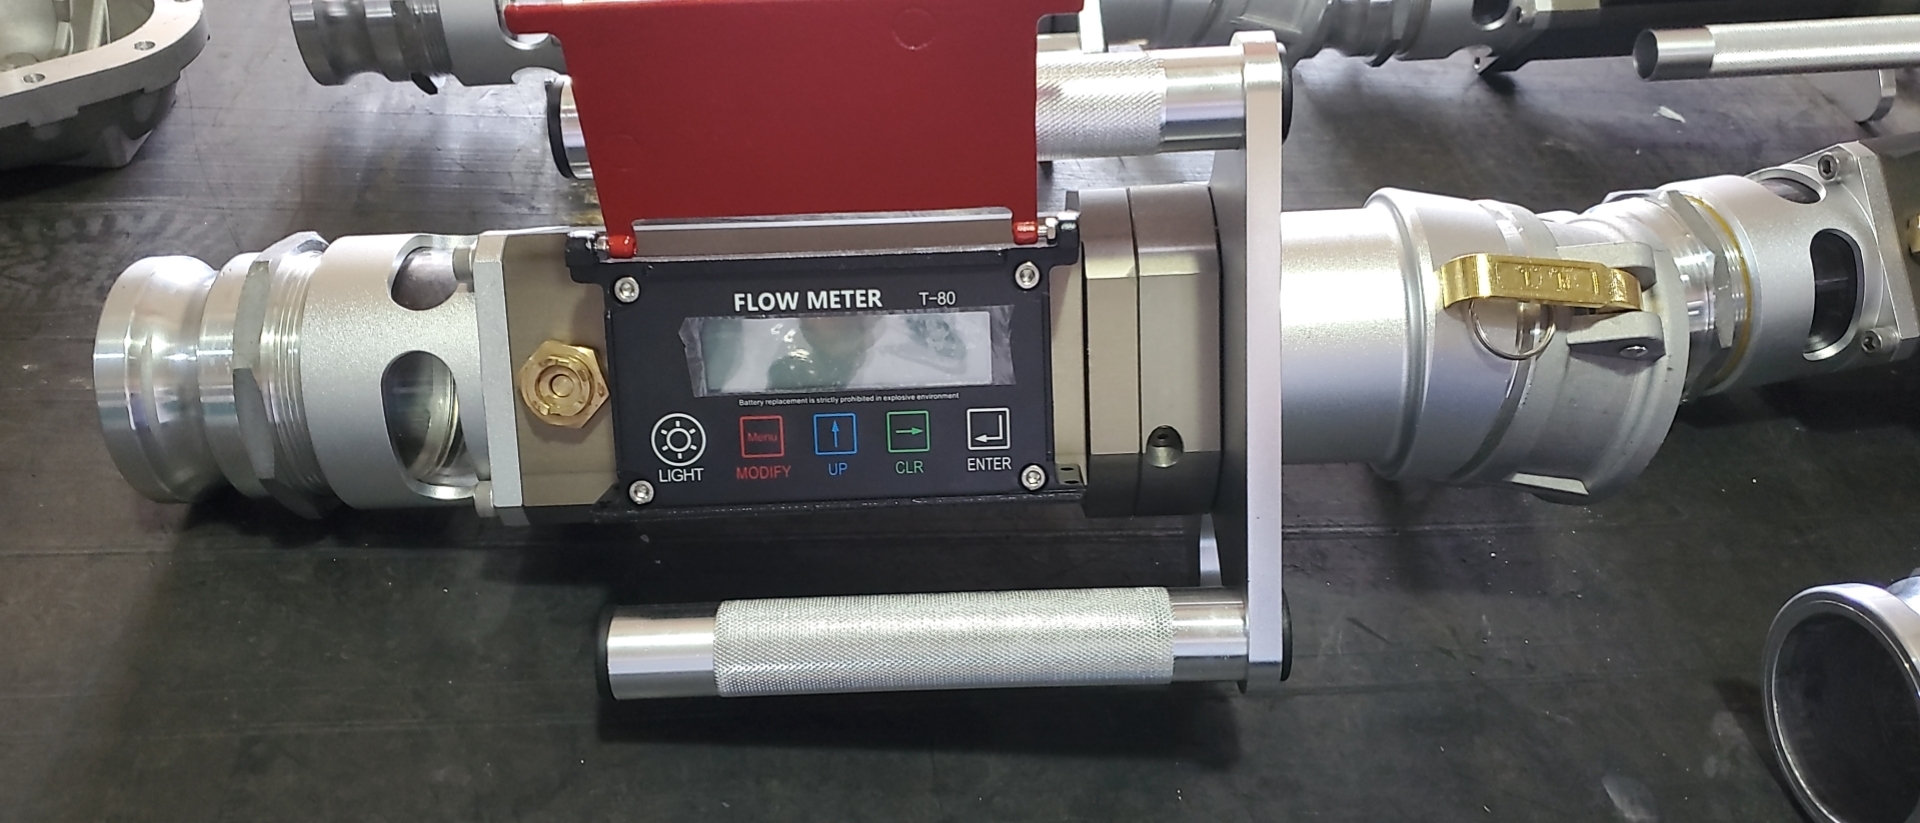 Aluminum Explosion-Proof High Protection Grade Gravity Unloading Flow Meter T-80 with 3 Inch Connector for Gas Station 